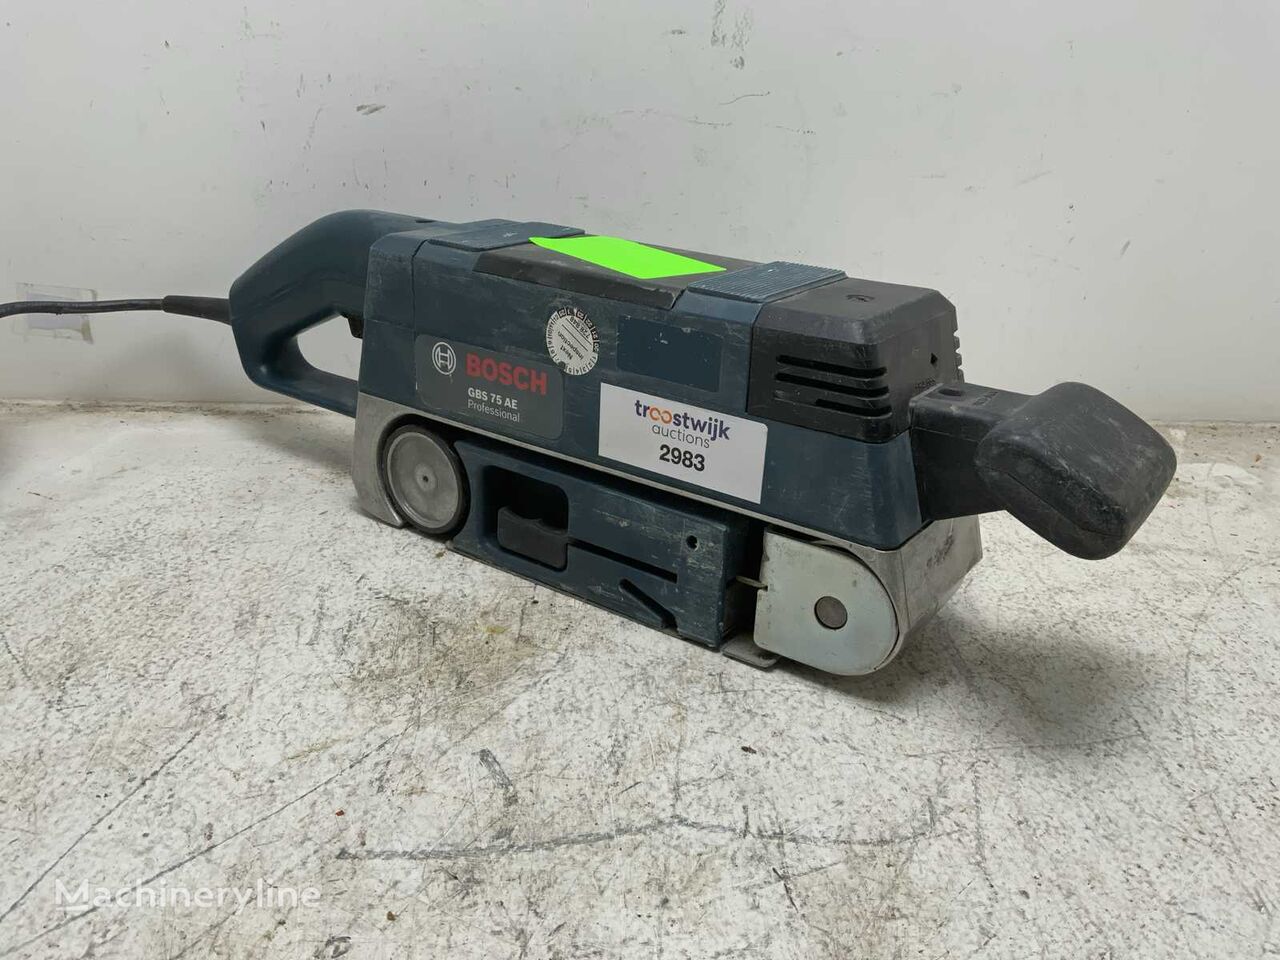 Bosch GBS 75 AE other tool